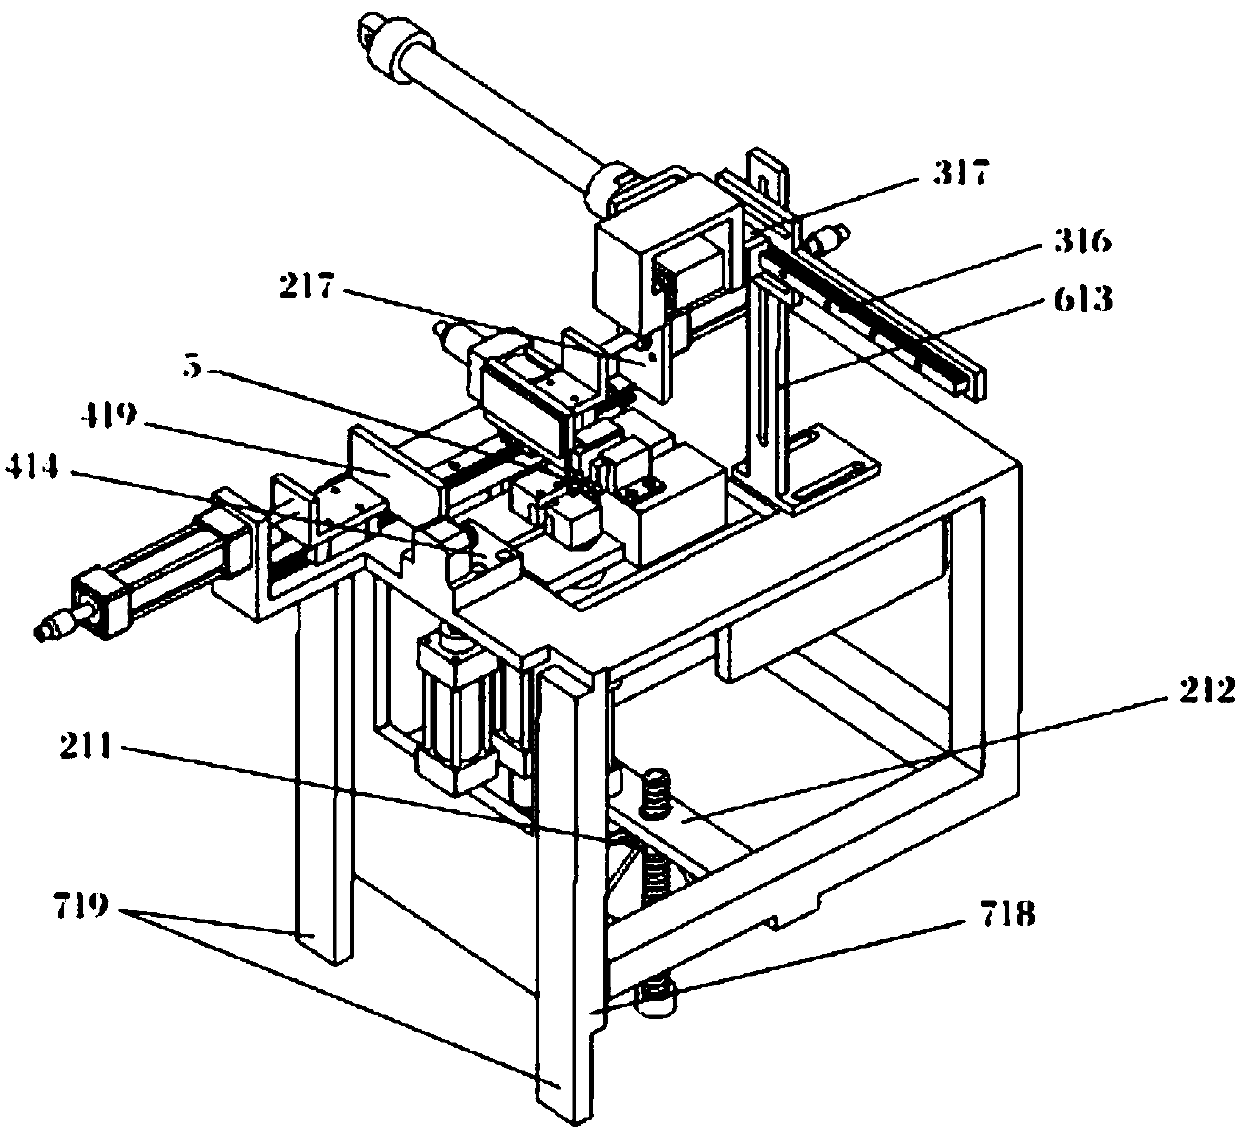 Full-automatic looping and butt-welding integrated machine